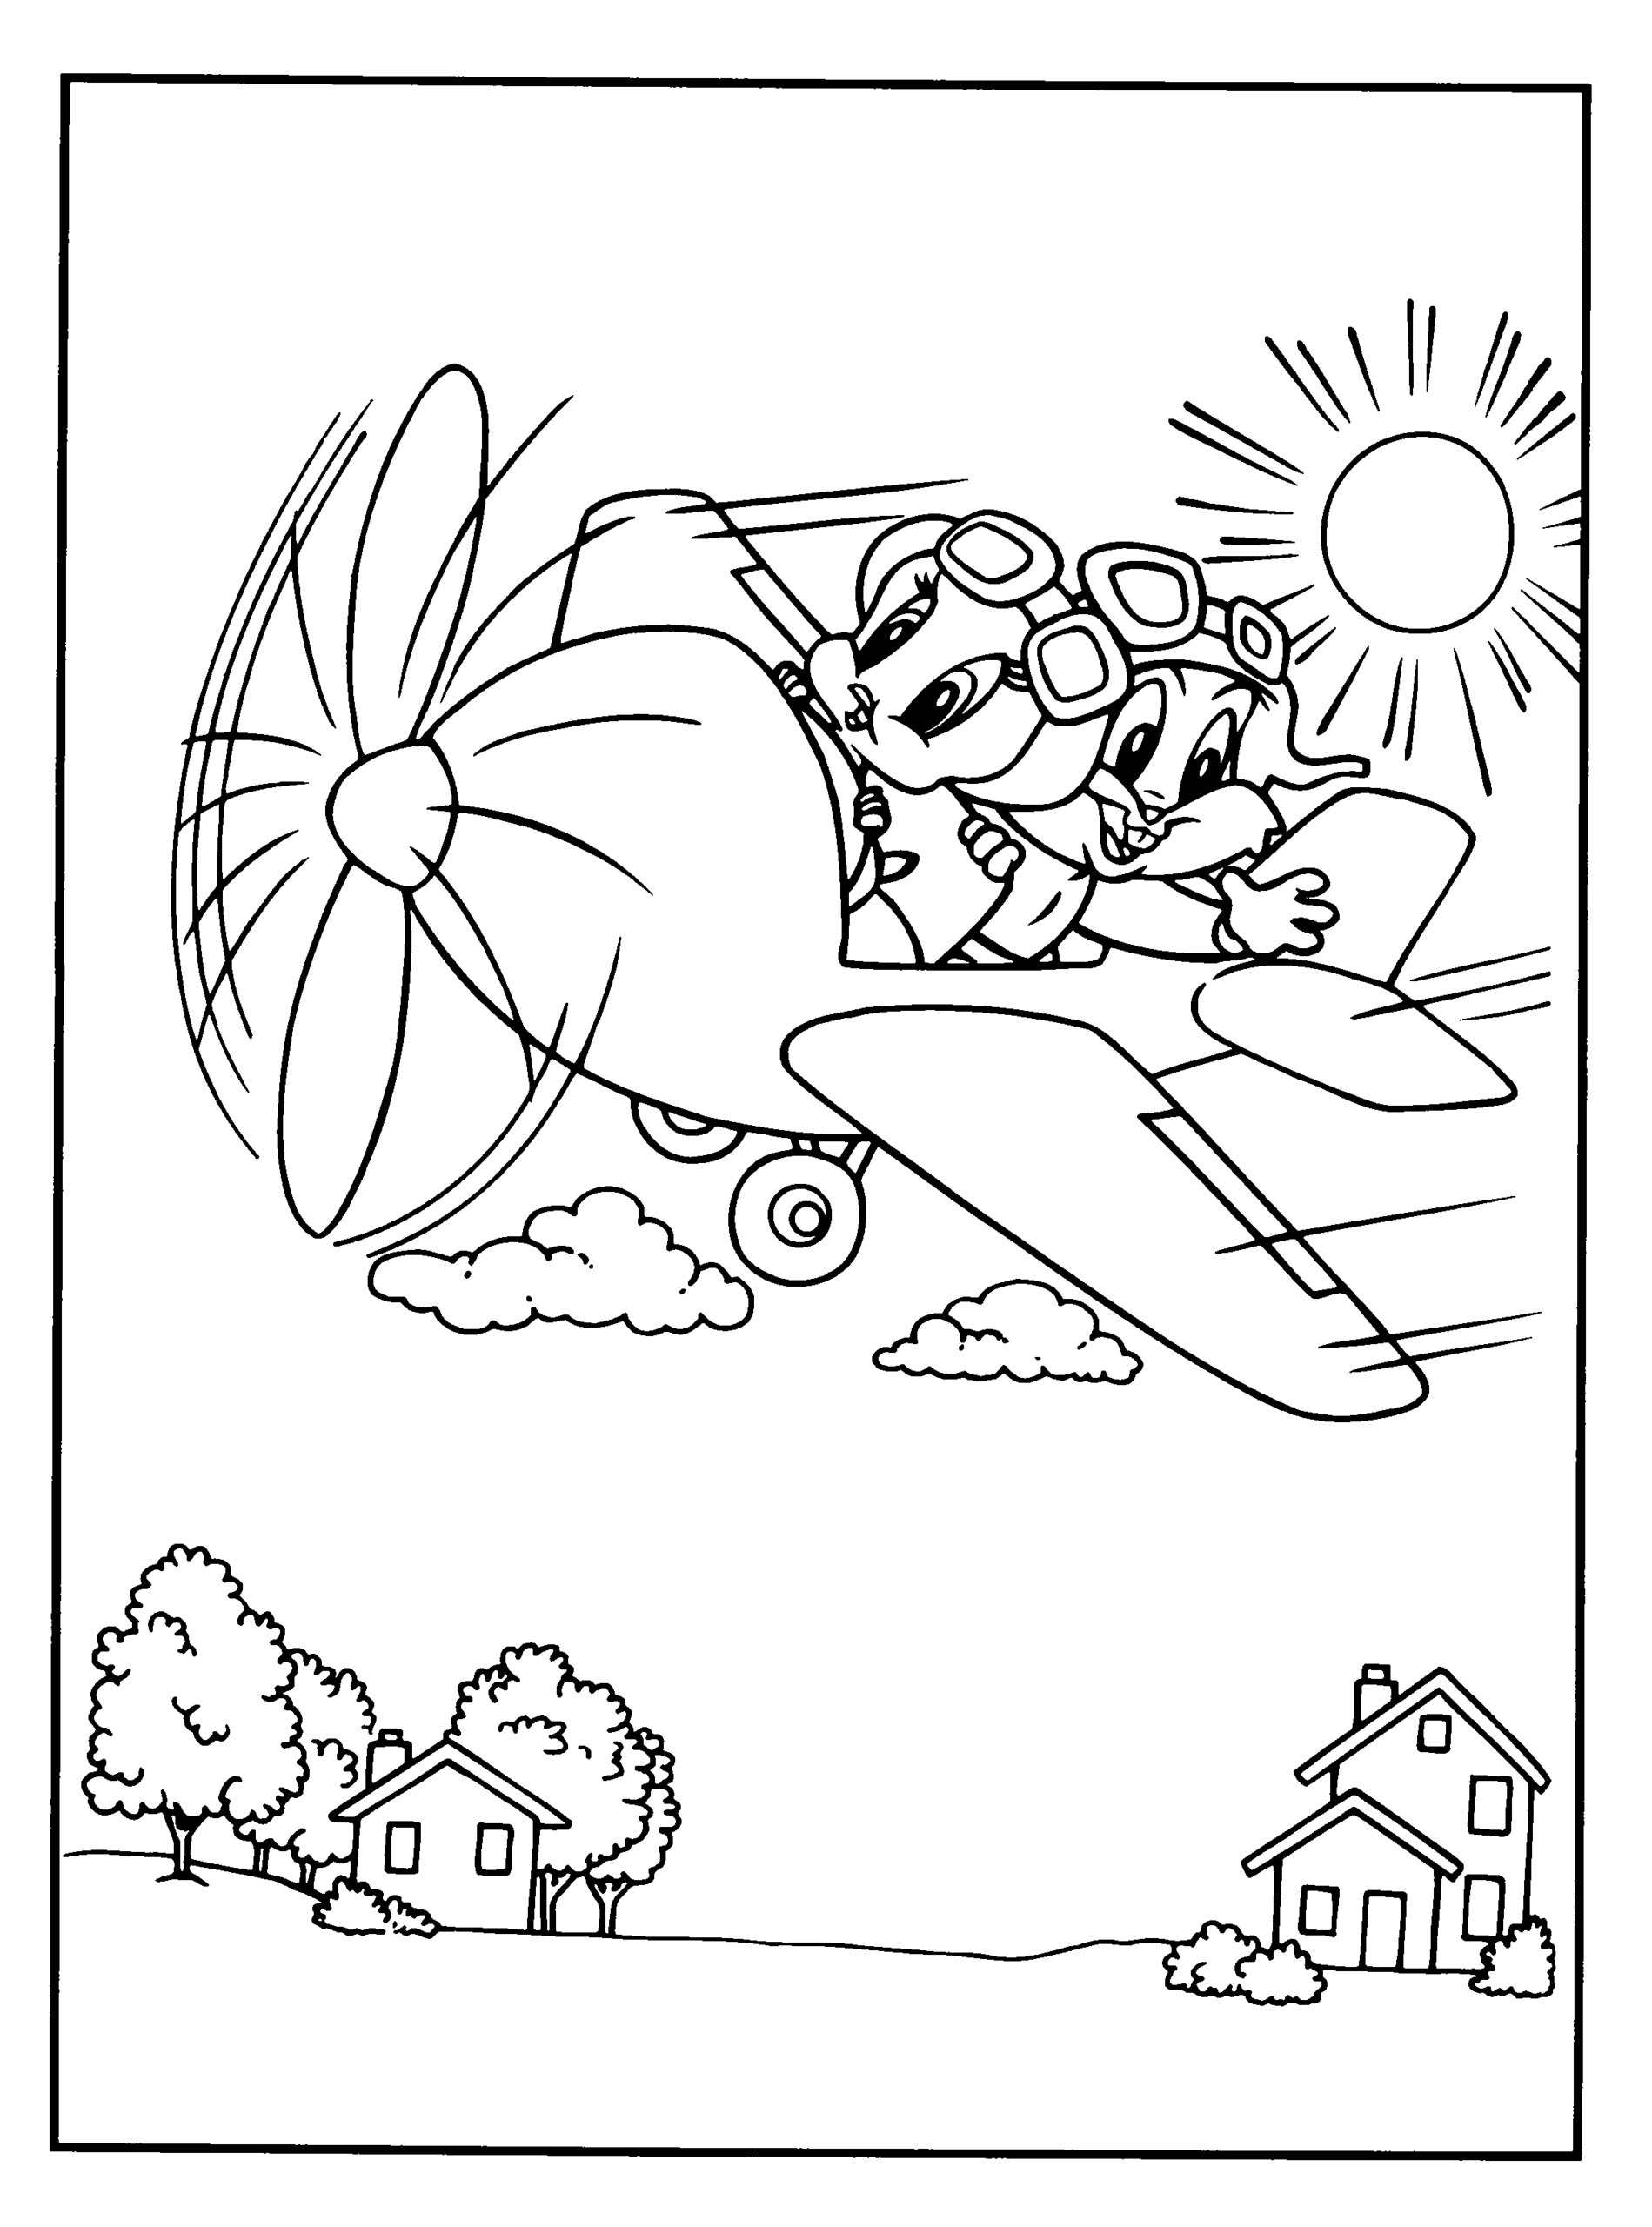 Looney Tunes Coloring Pages TV Film looney tunes 14 Printable 2020 04580 Coloring4free